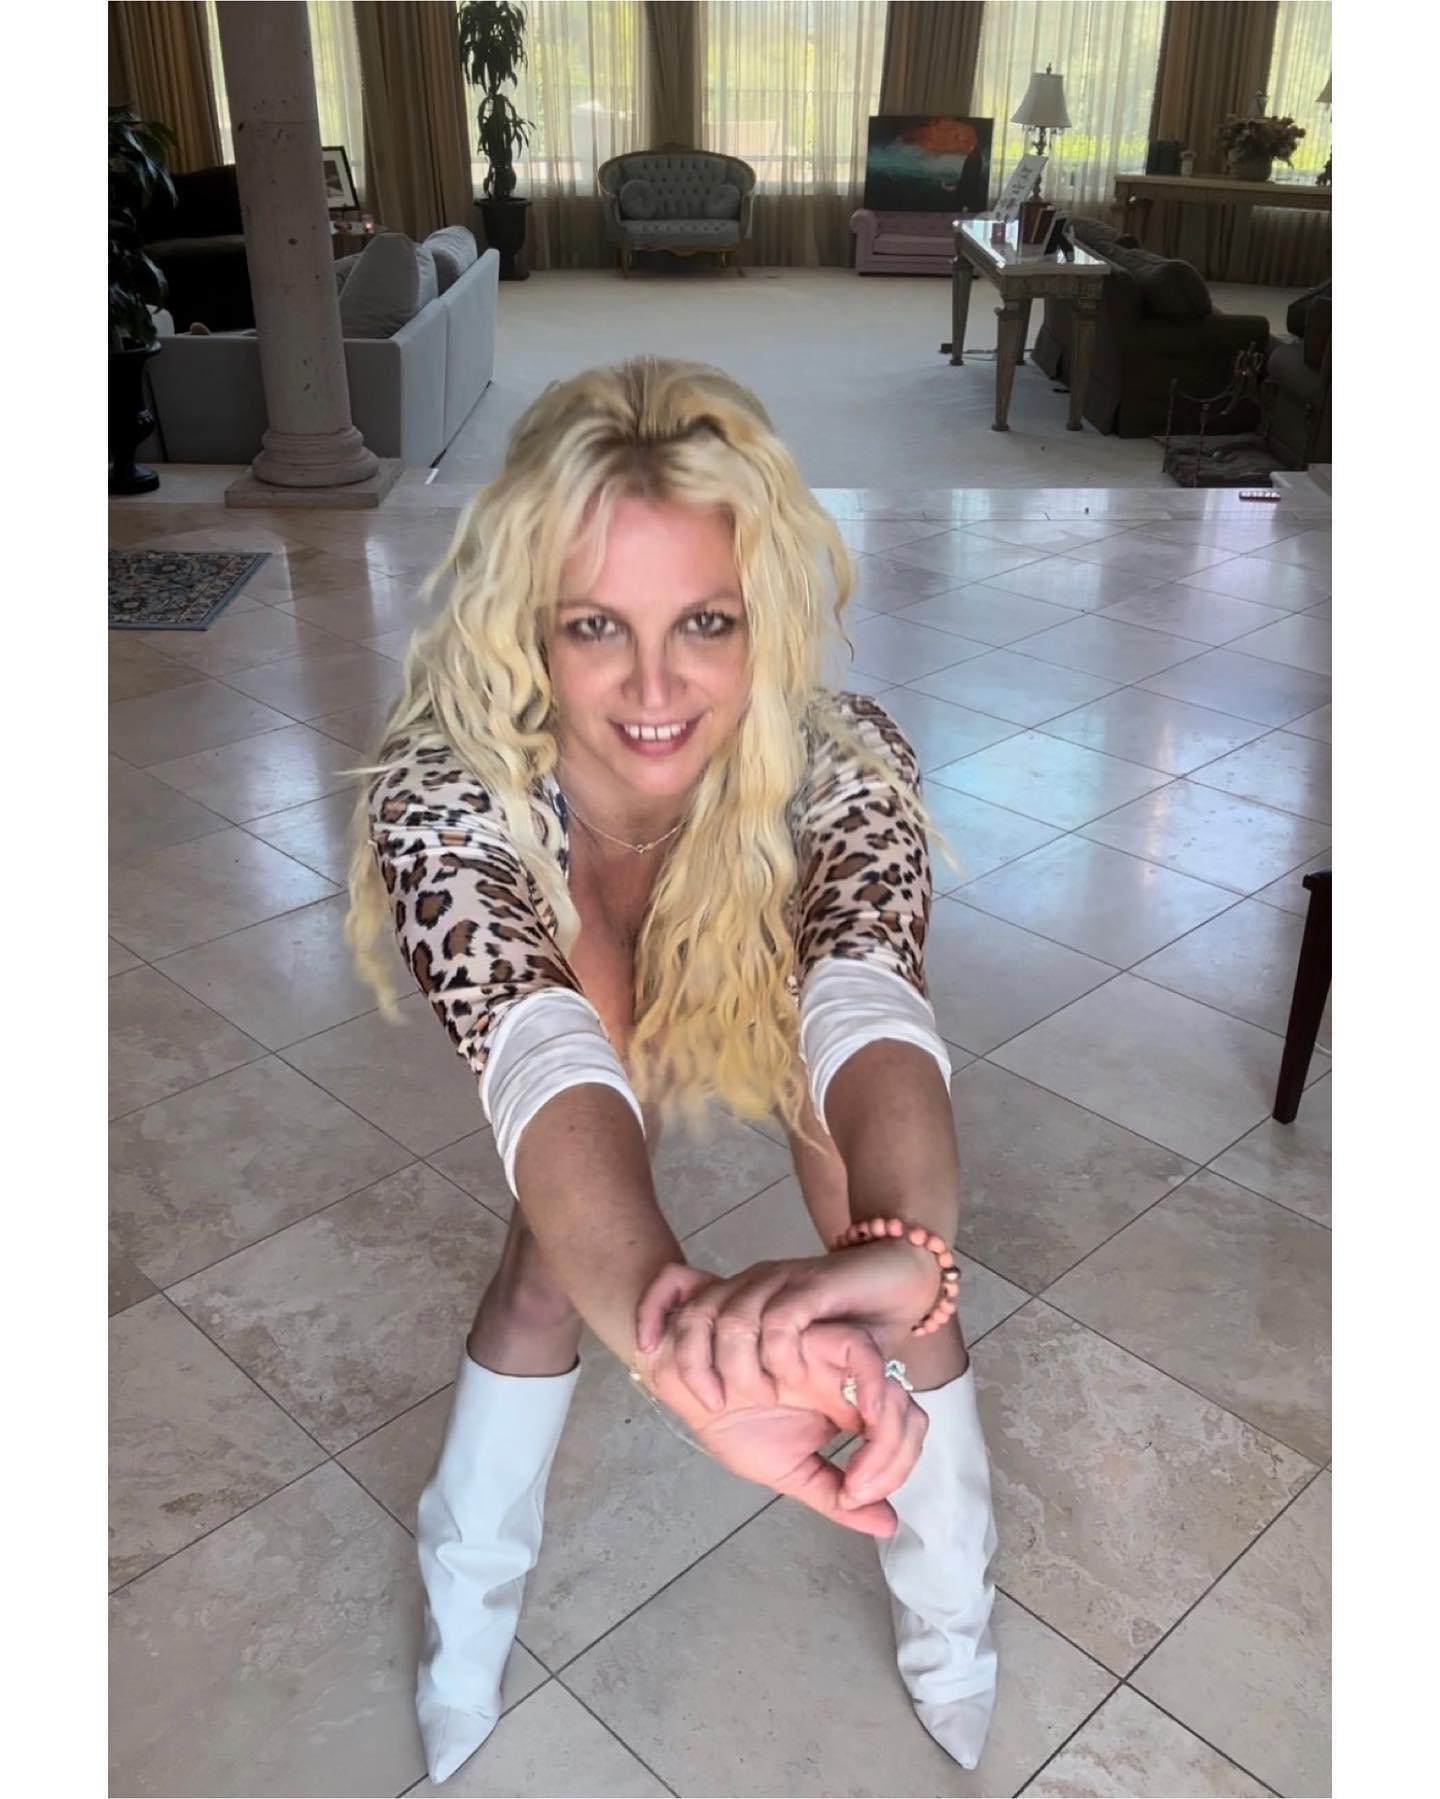 Britney Spears In Plunging Animal-Print Bodysuit Says ‘Just Me’